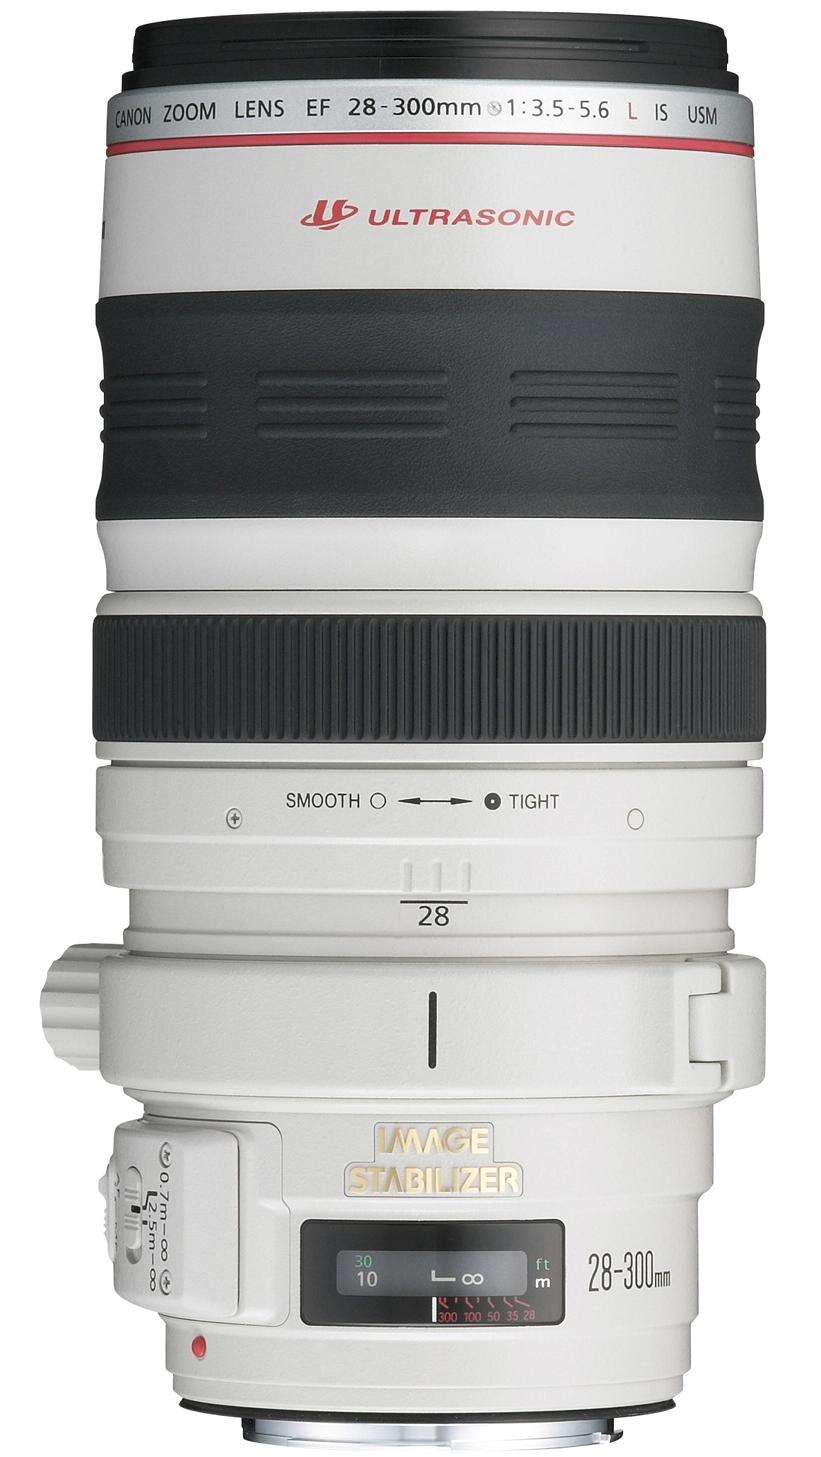 CANON 28-300mm f/3.5-5.6L IS USM EF